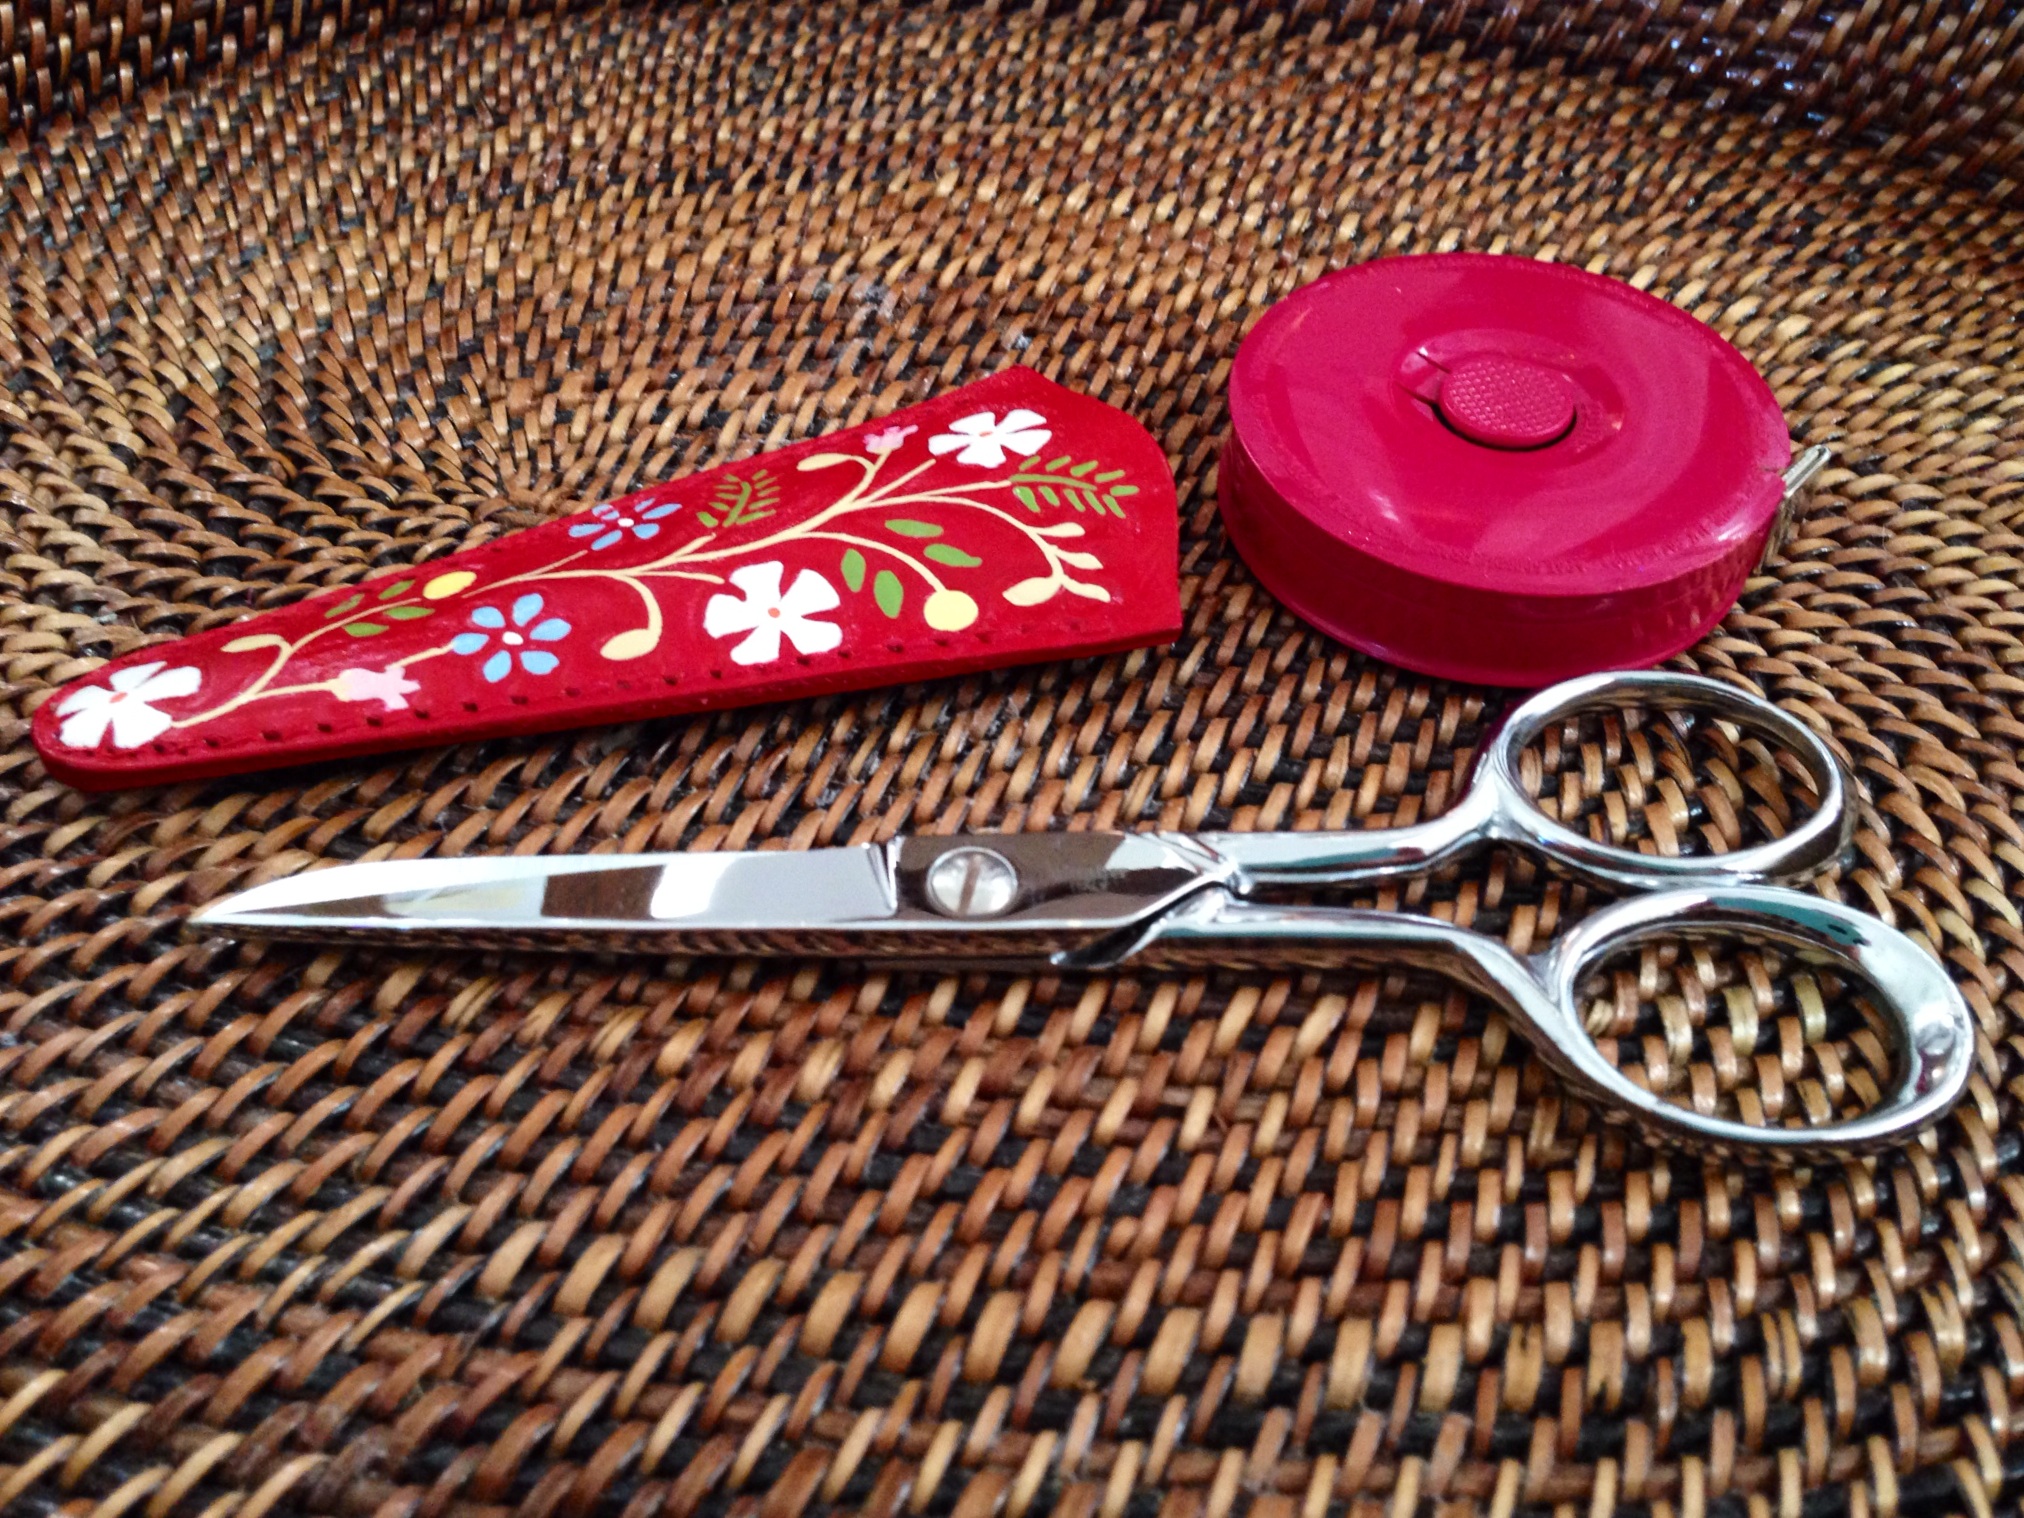 Tools Day: Scissors – Warped for Good